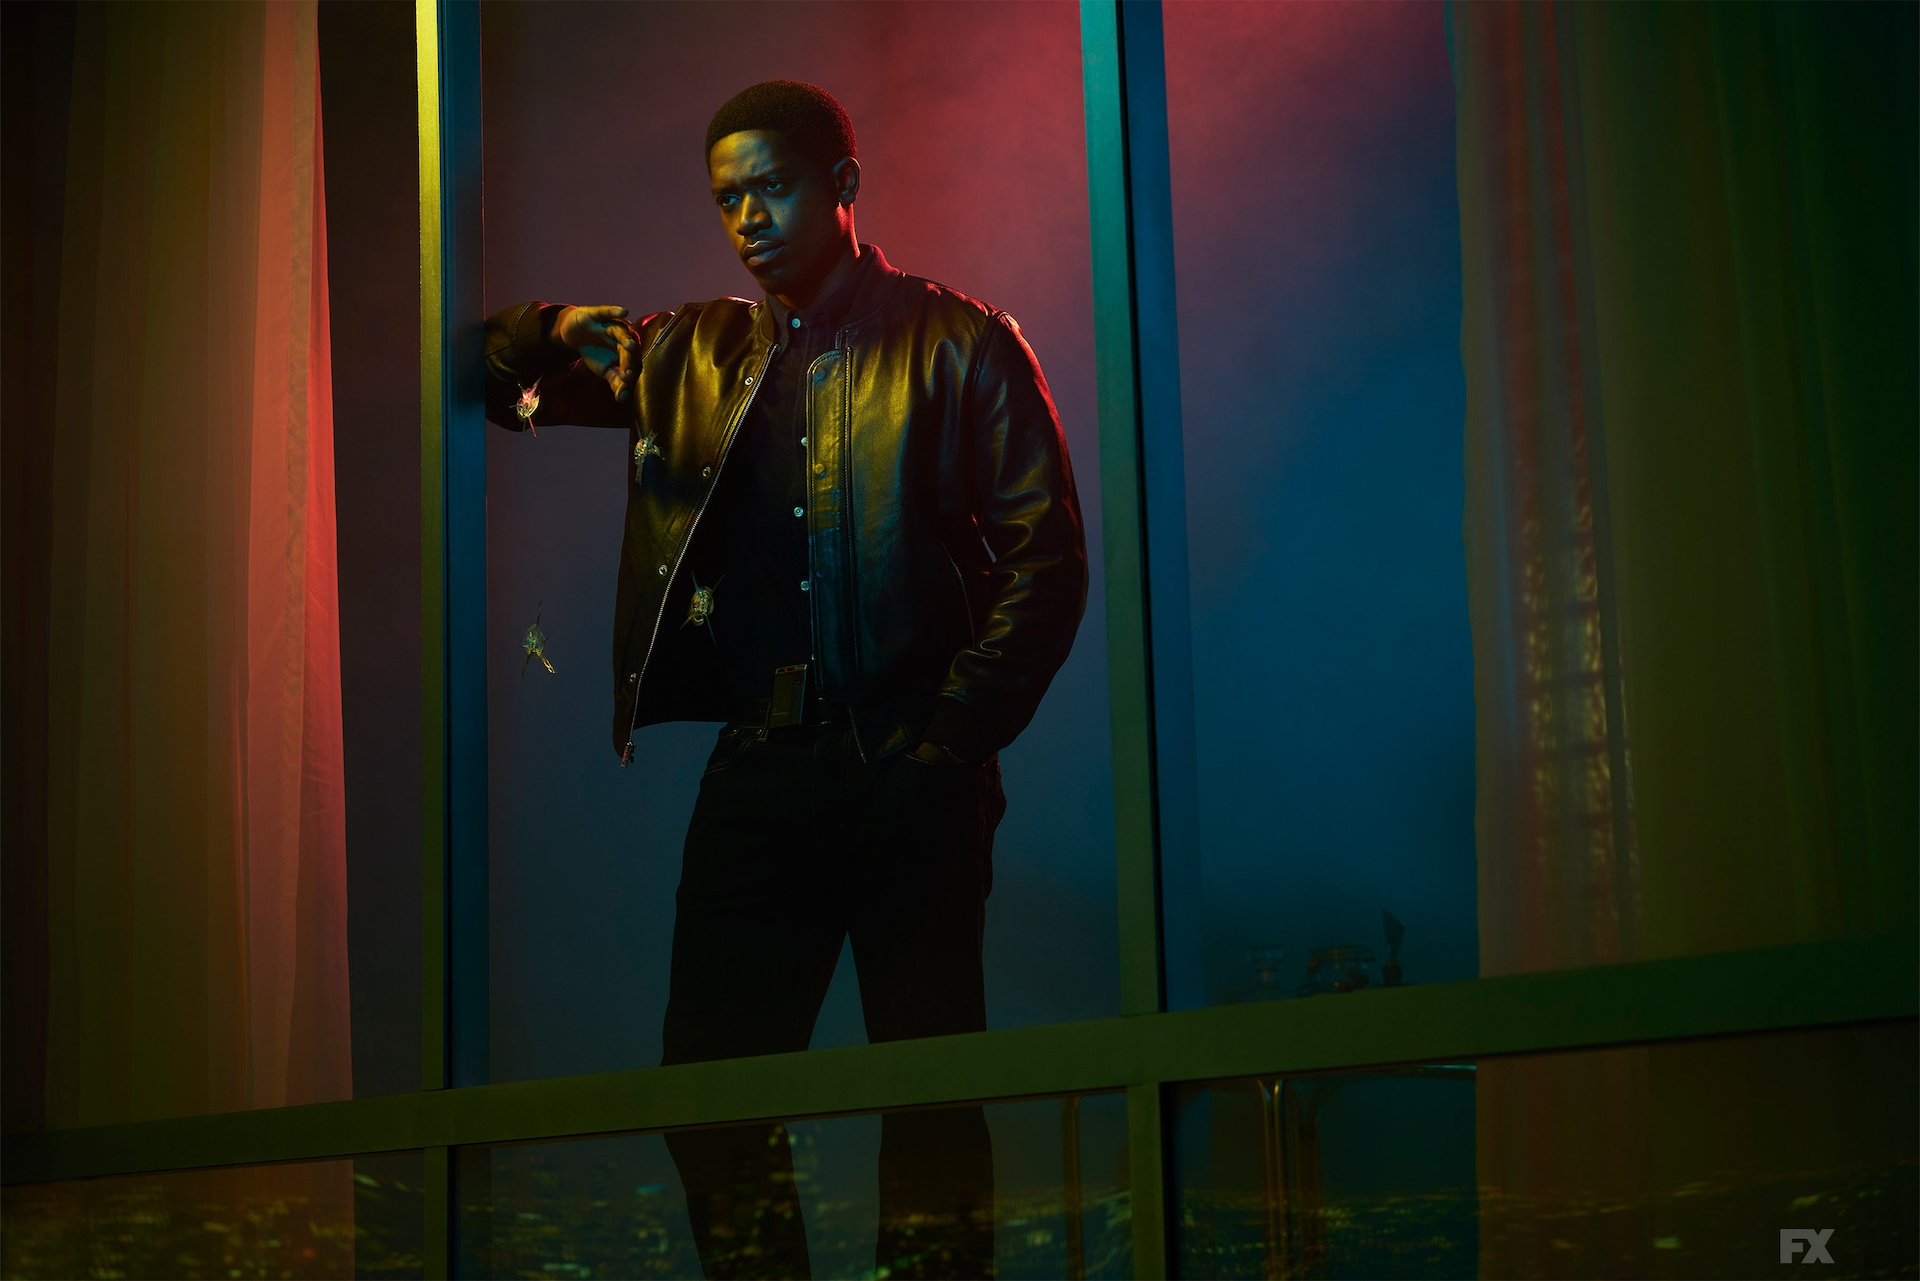 Franklin Saint wearing a leather jacket and leaning against a large window